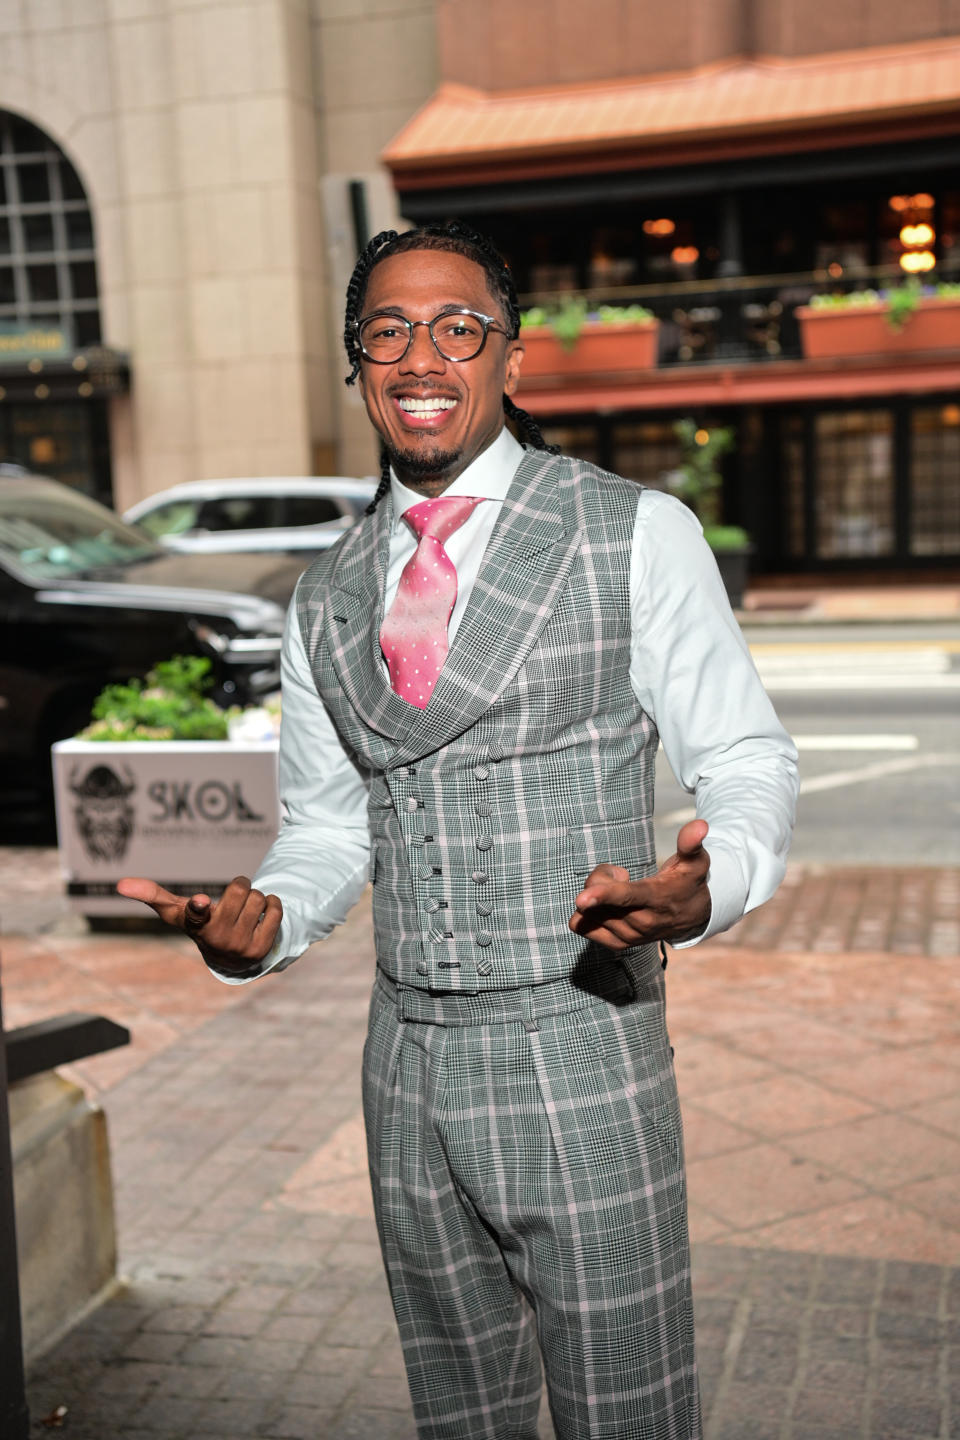 Nick Cannon in a grey plaid suit with a pink tie, smiling and gesturing with his hands on a city sidewalk